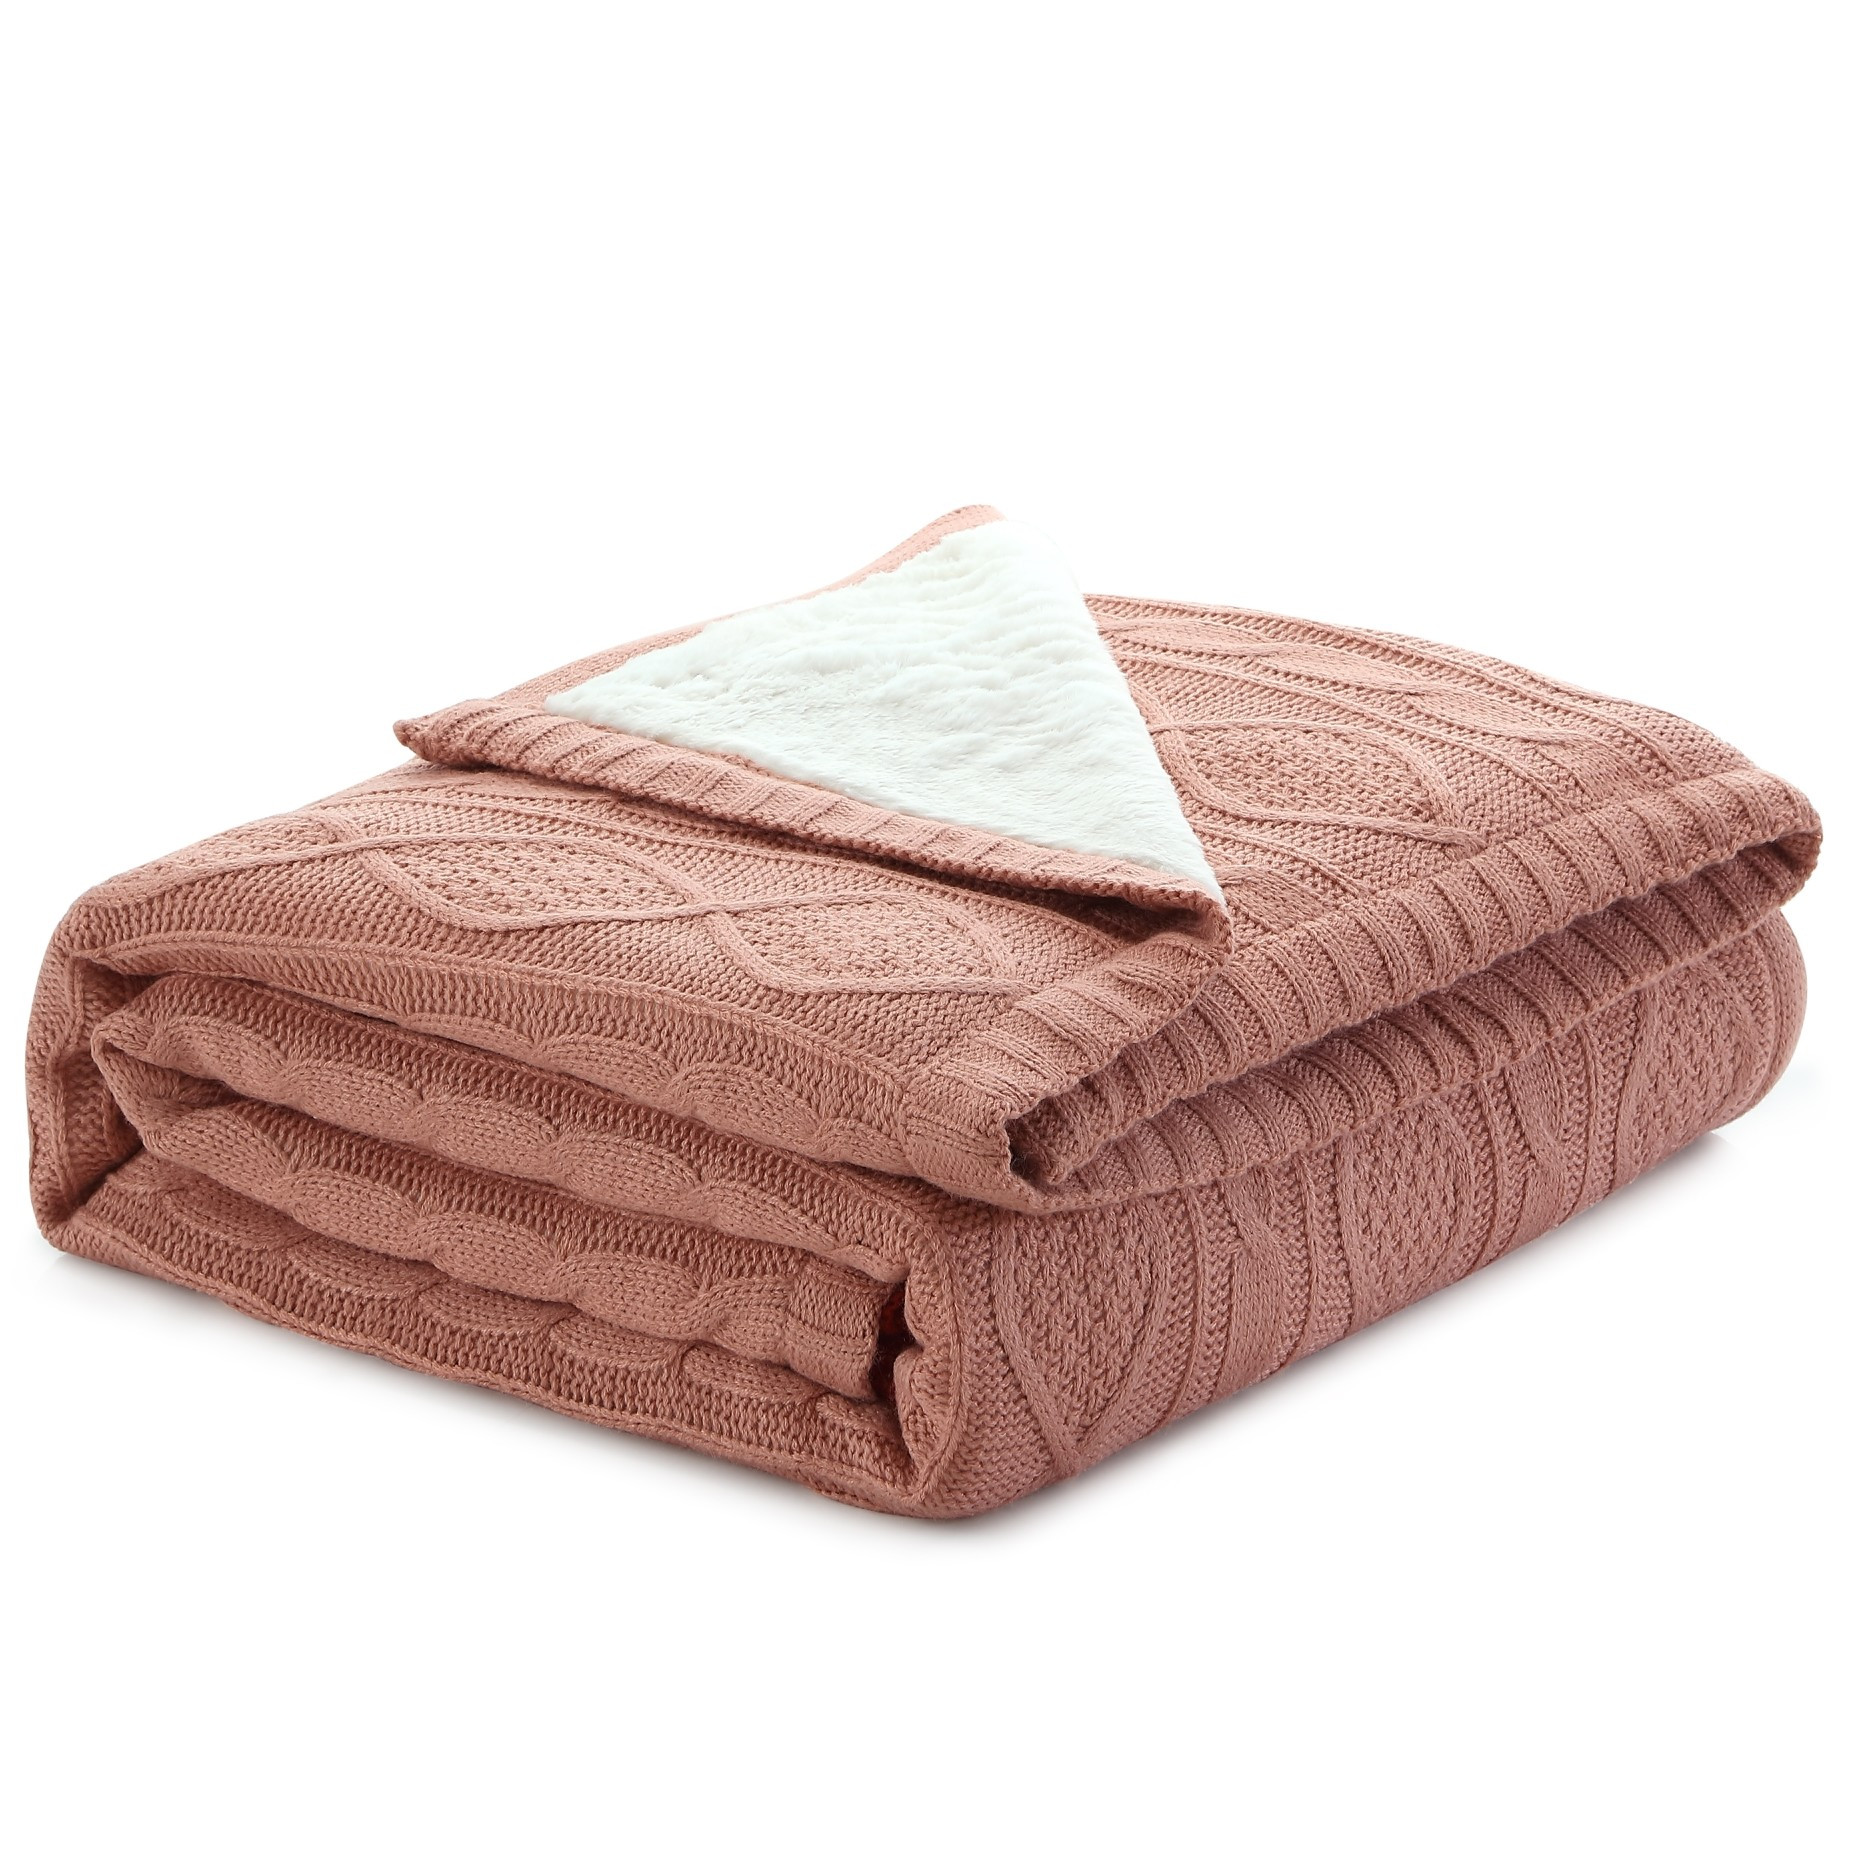 Blush Knitted Acrylic Solid Color Throw Blanket-531257-1